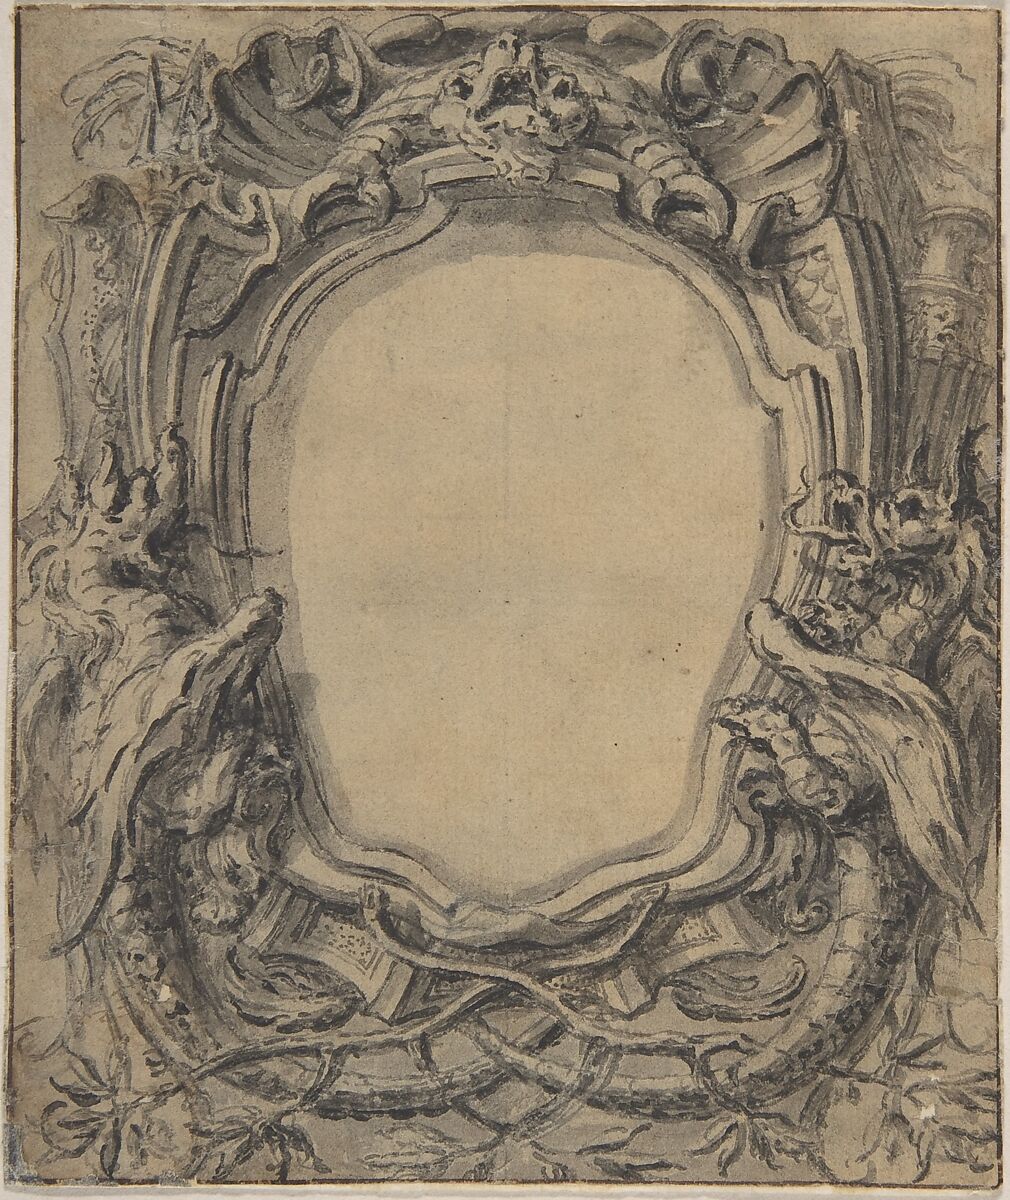 Study for a Cartouche, Gilles-Marie Oppenord (French, Paris 1672–1742 Paris), Pen and black ink with brush and gray wash. Framing lines in brown ink. 